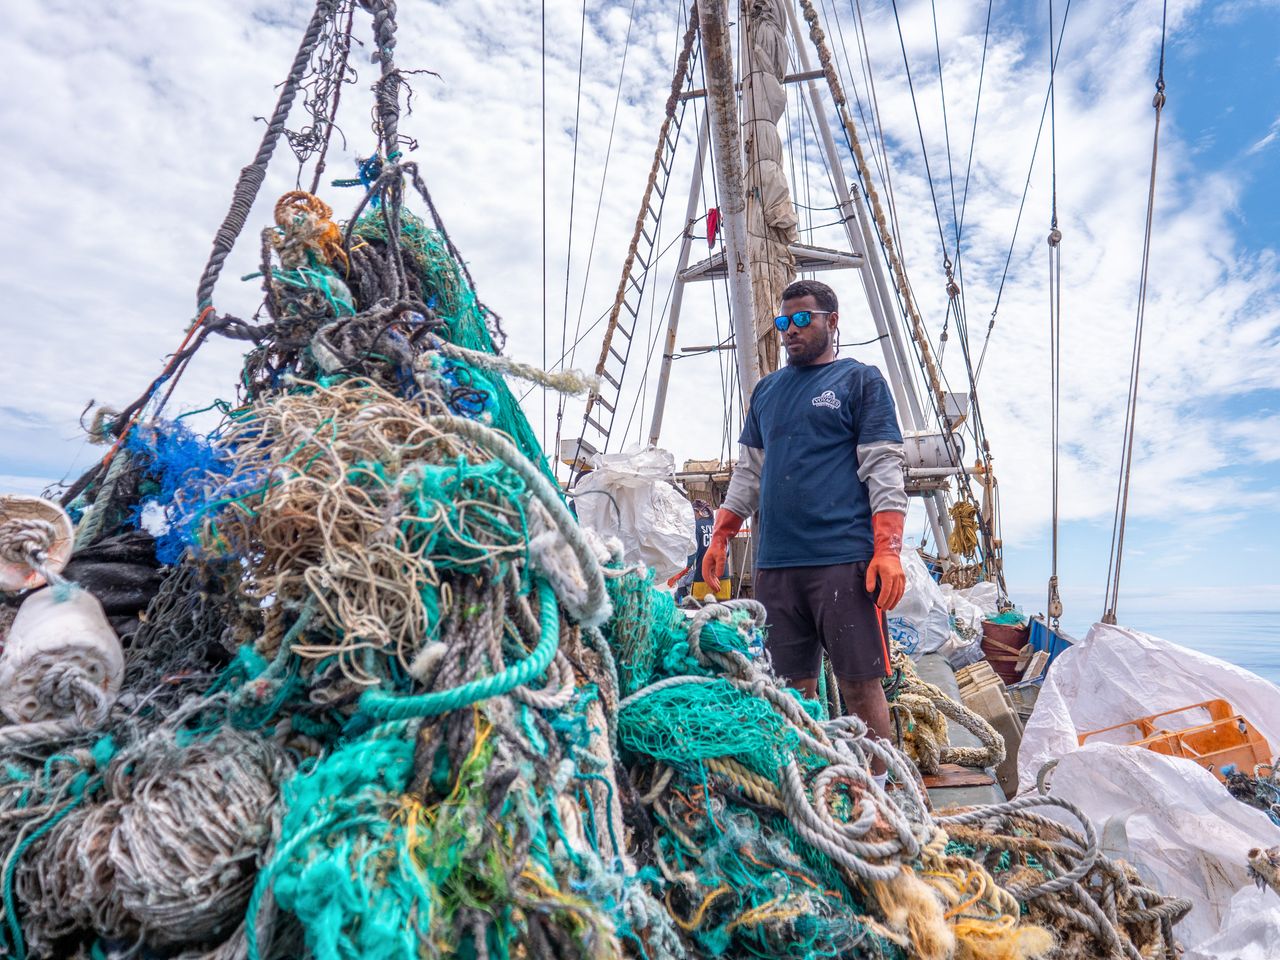 The Ocean Voyages Institute hopes to collect one million pounds of ocean waste by 2021.